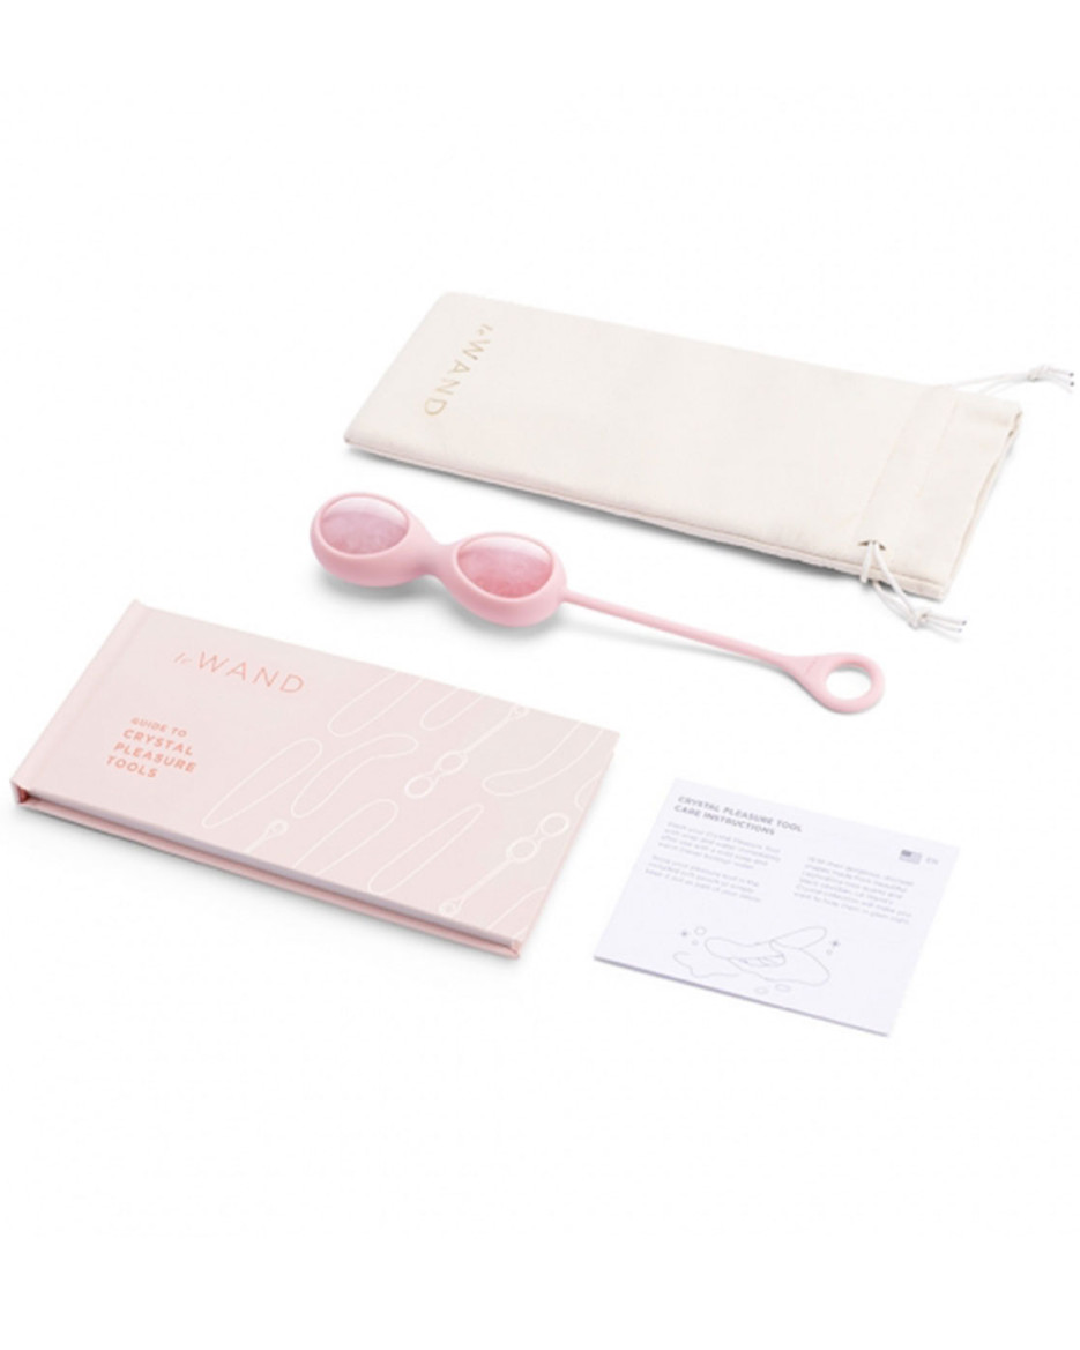 Le Wand Crystal Yoni Eggs - Rose Quartz in silicone case with loop handle next to storage bag and instruction booklet 